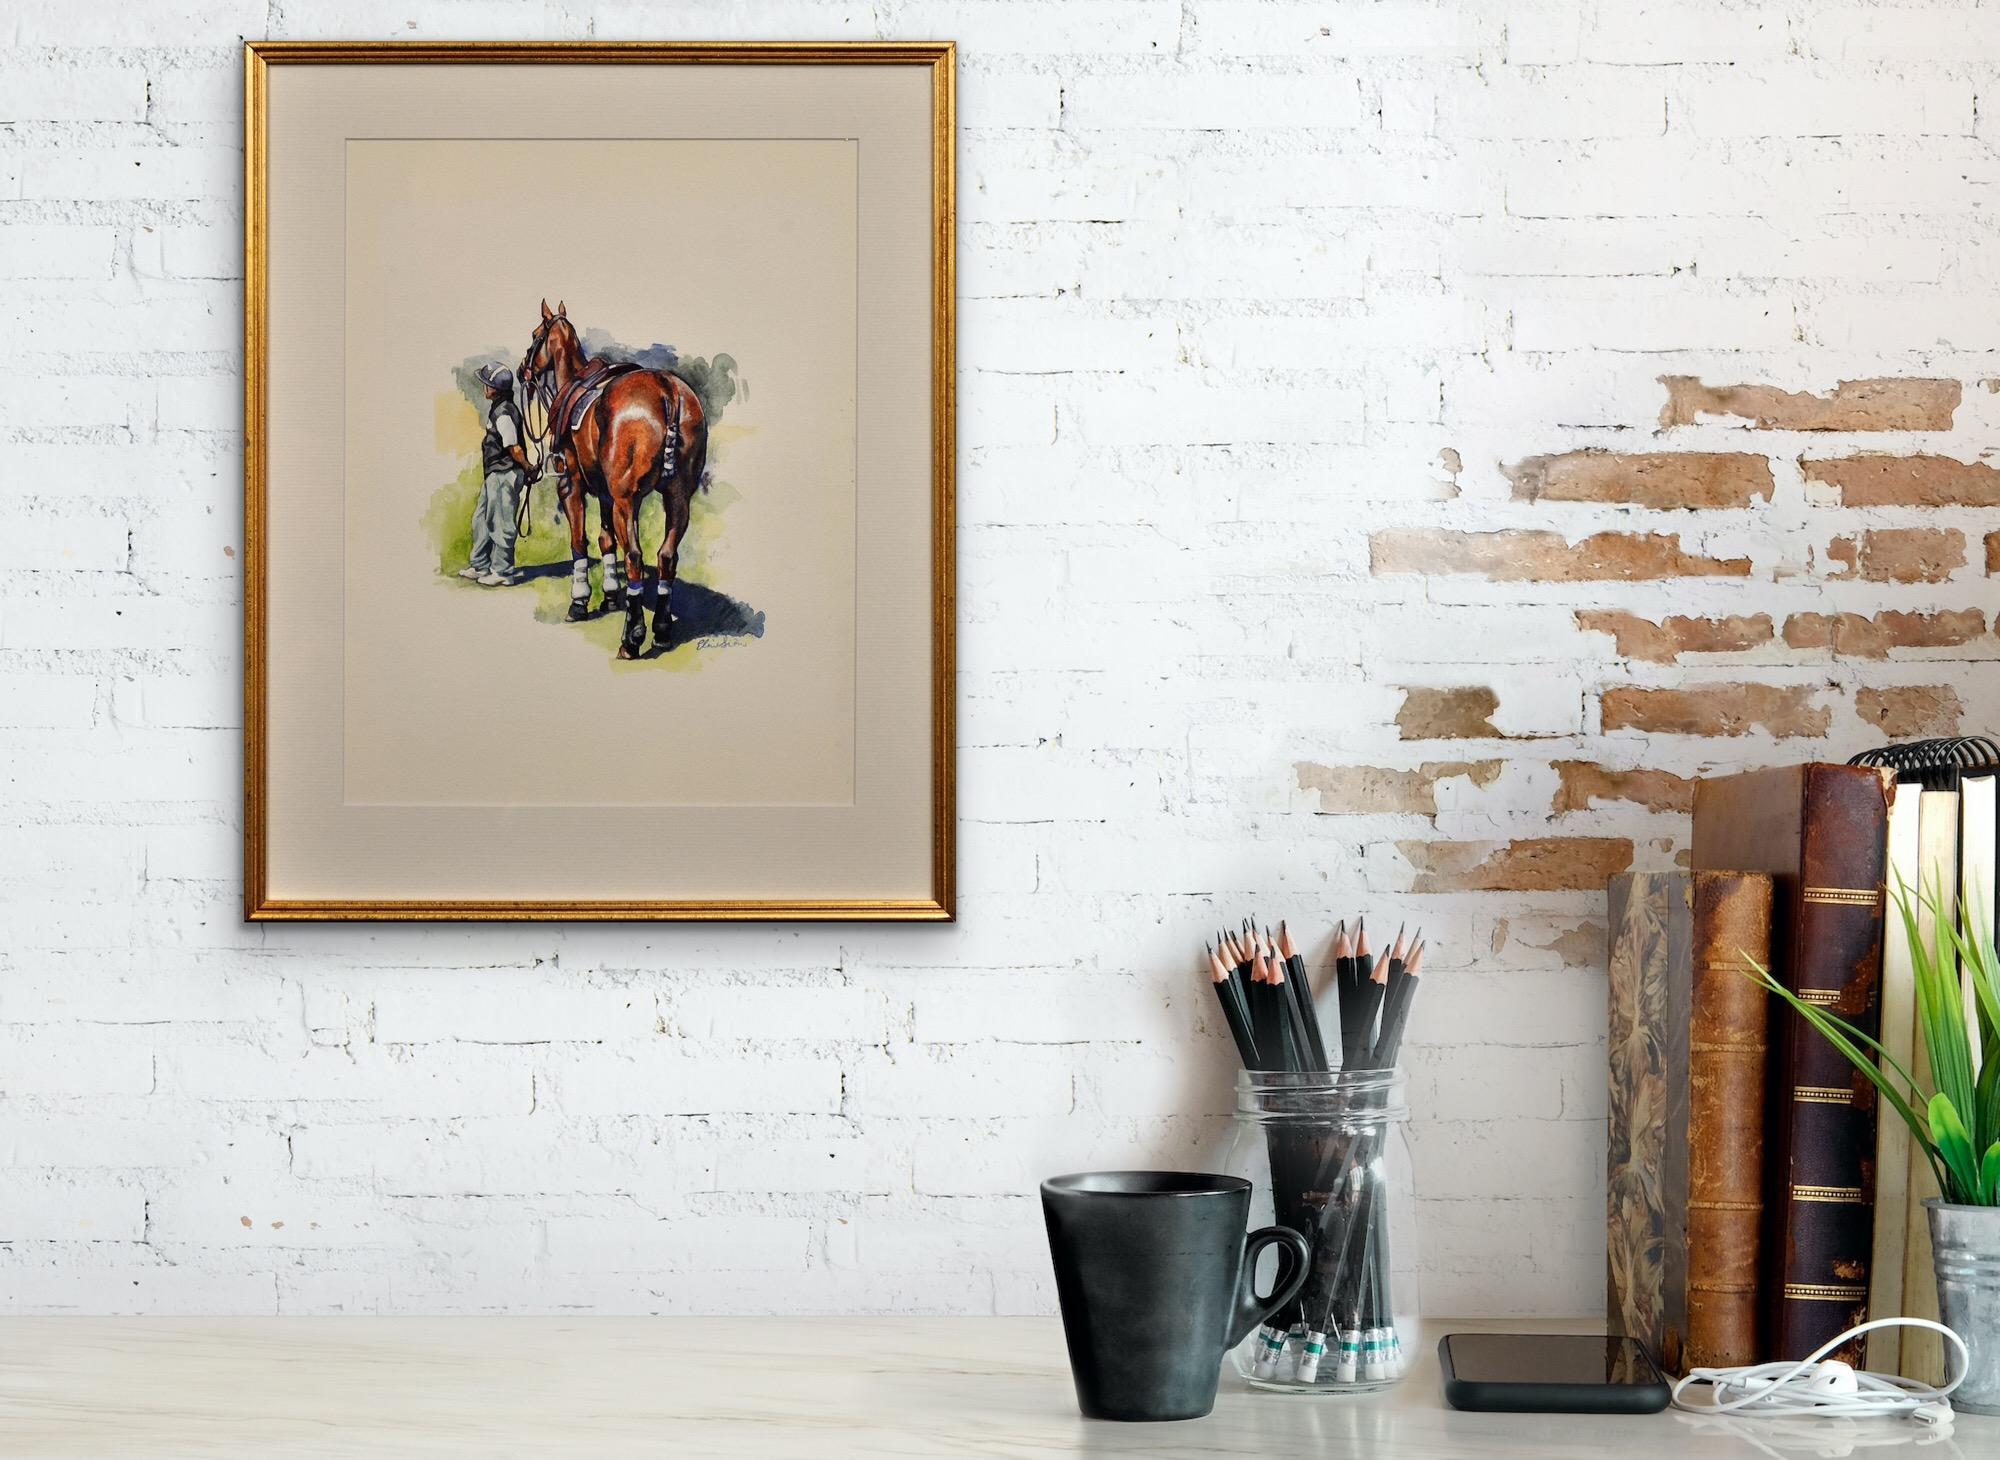 Polo Match, Cirencester, Player and Pony. Cotswolds. Parkland. Framed Watercolor For Sale 16